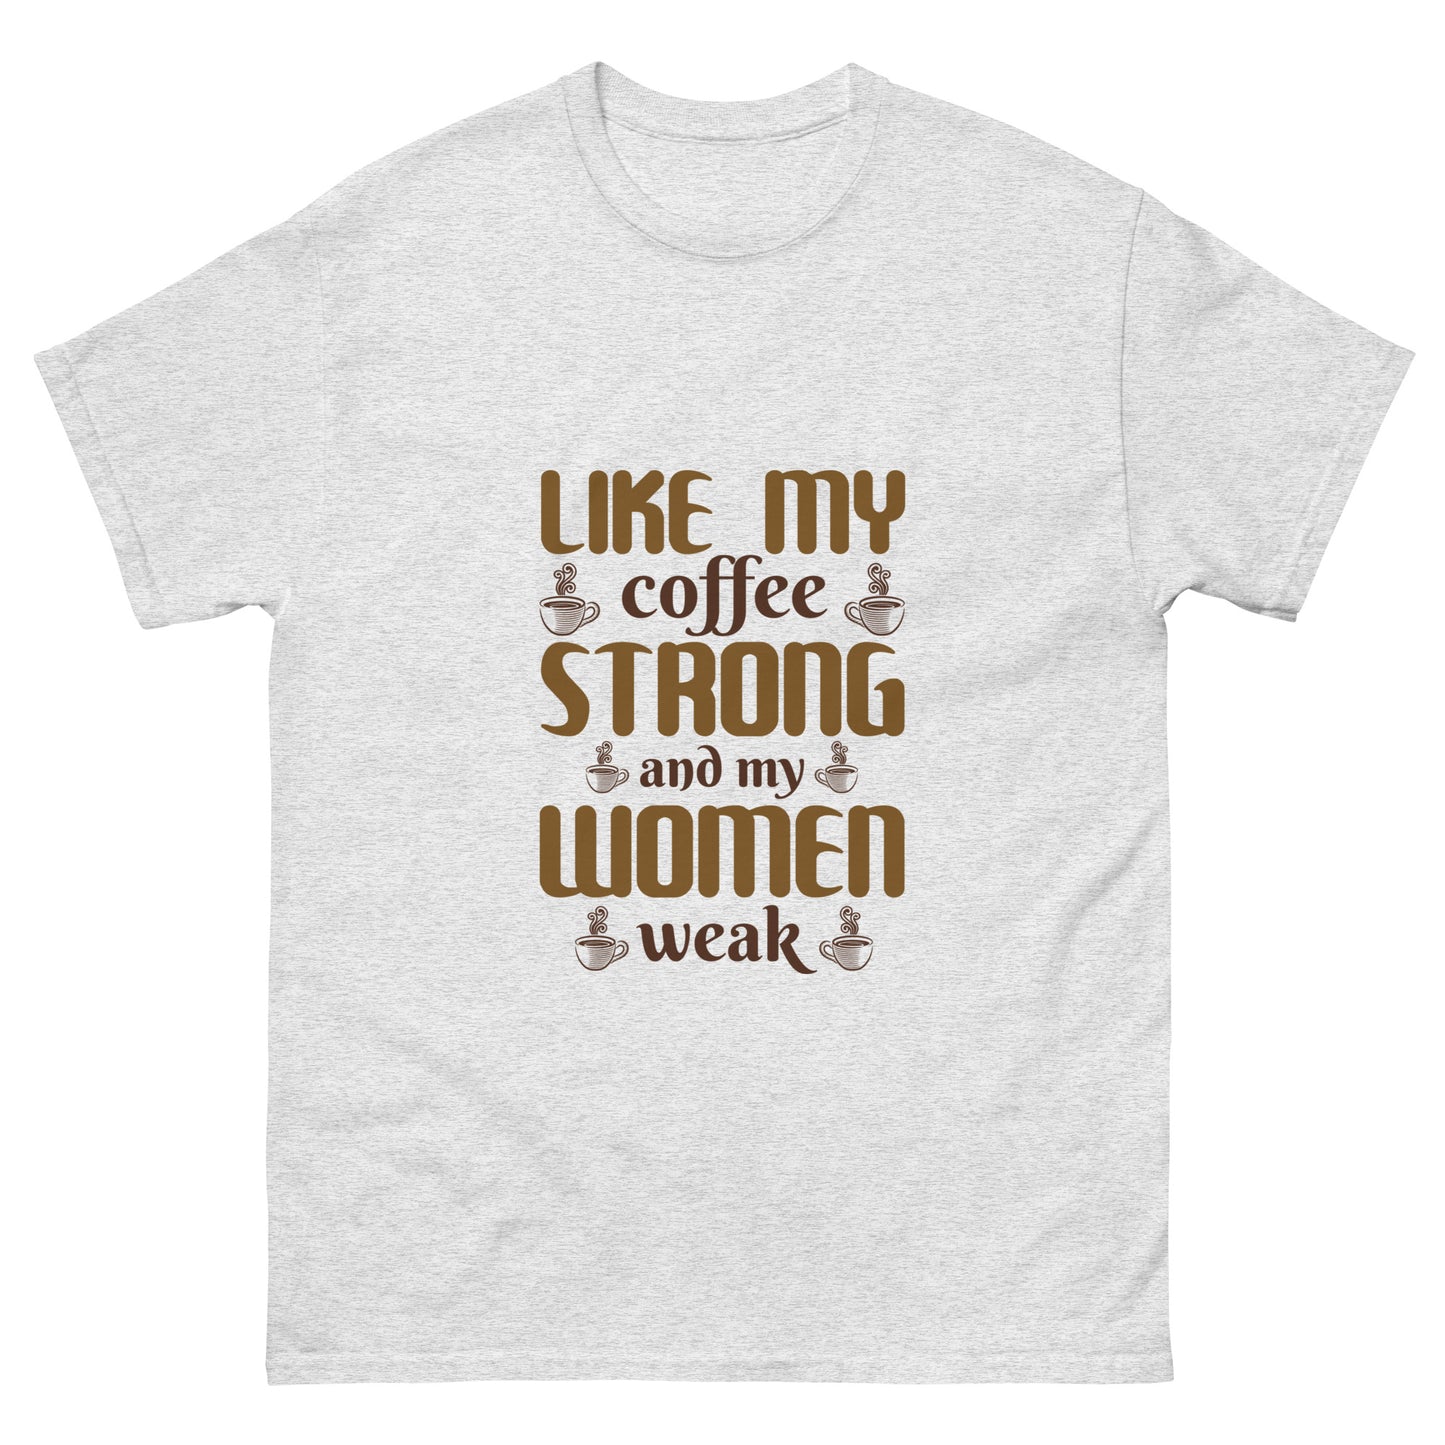 Men's classic tee COFFEE STRONG